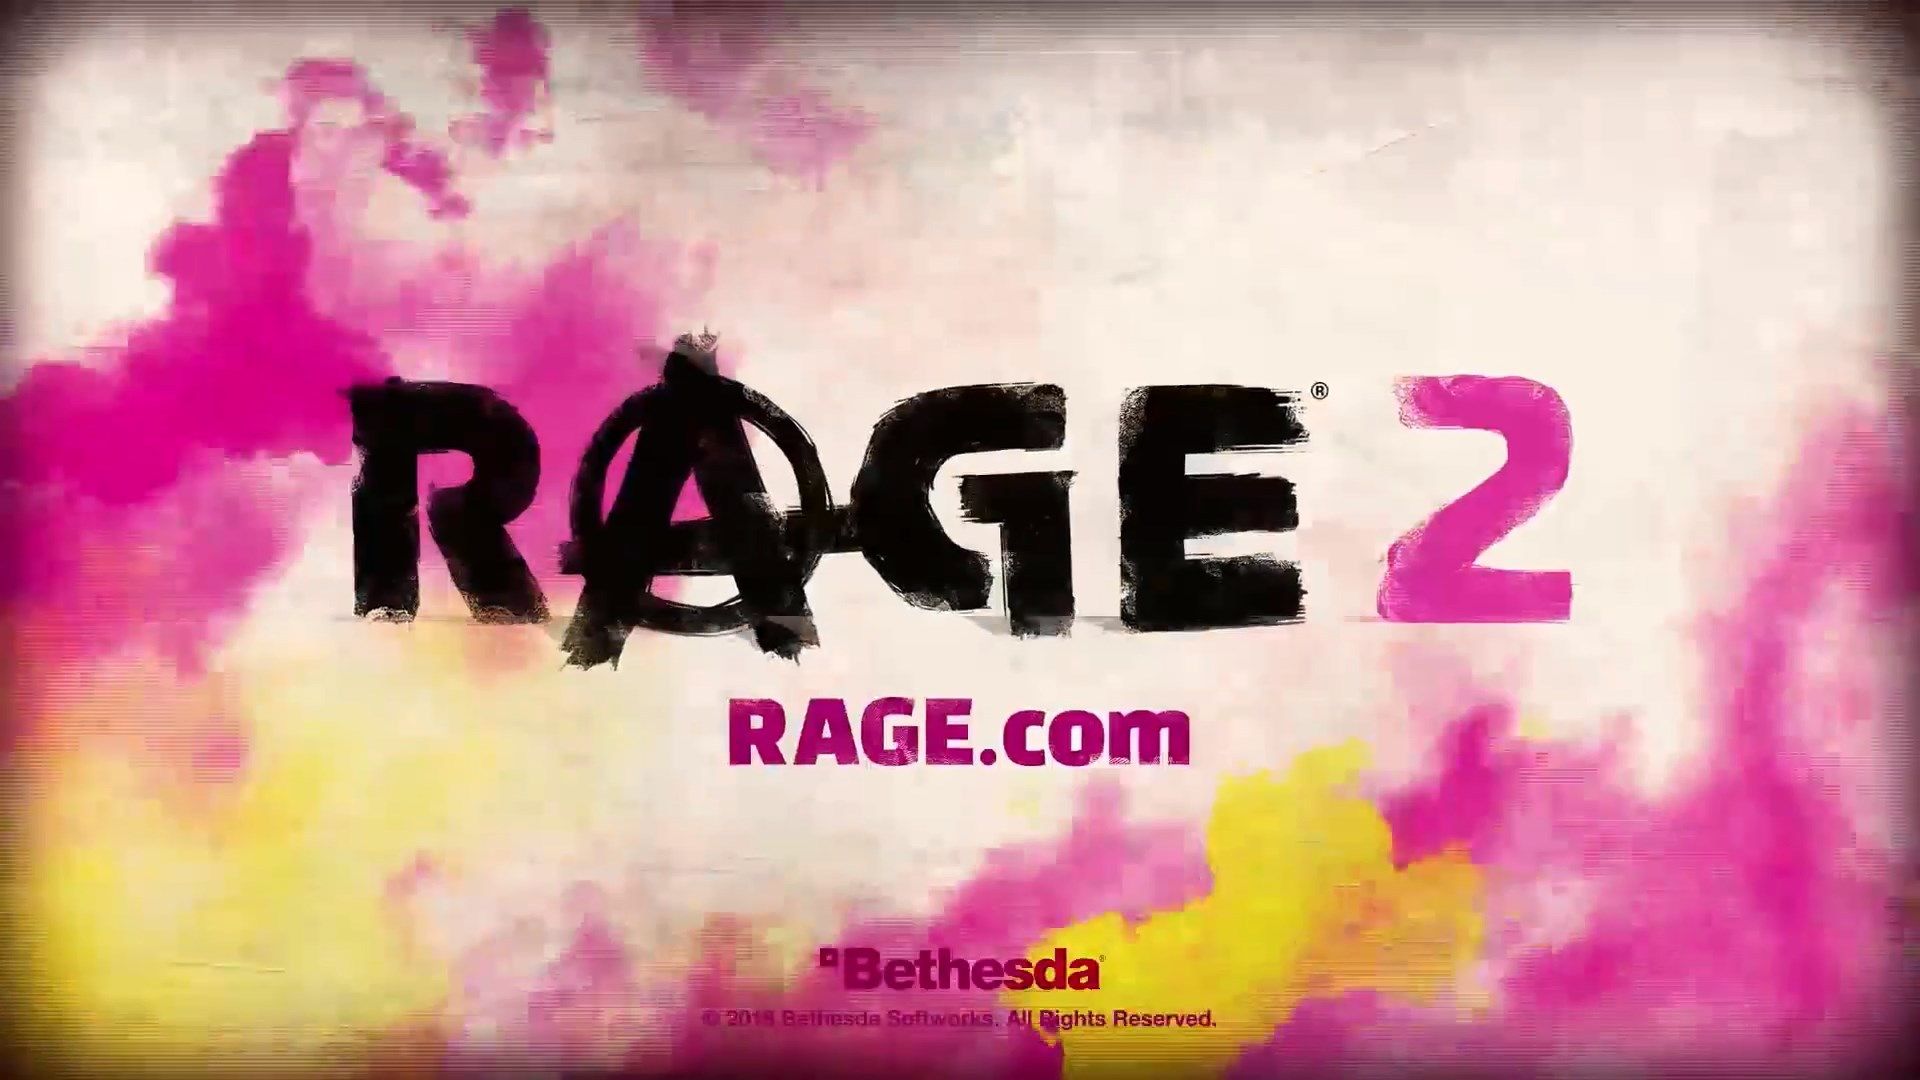 Rage 2 will run at 60FPS on Enhanced consoles and will be strictly single player